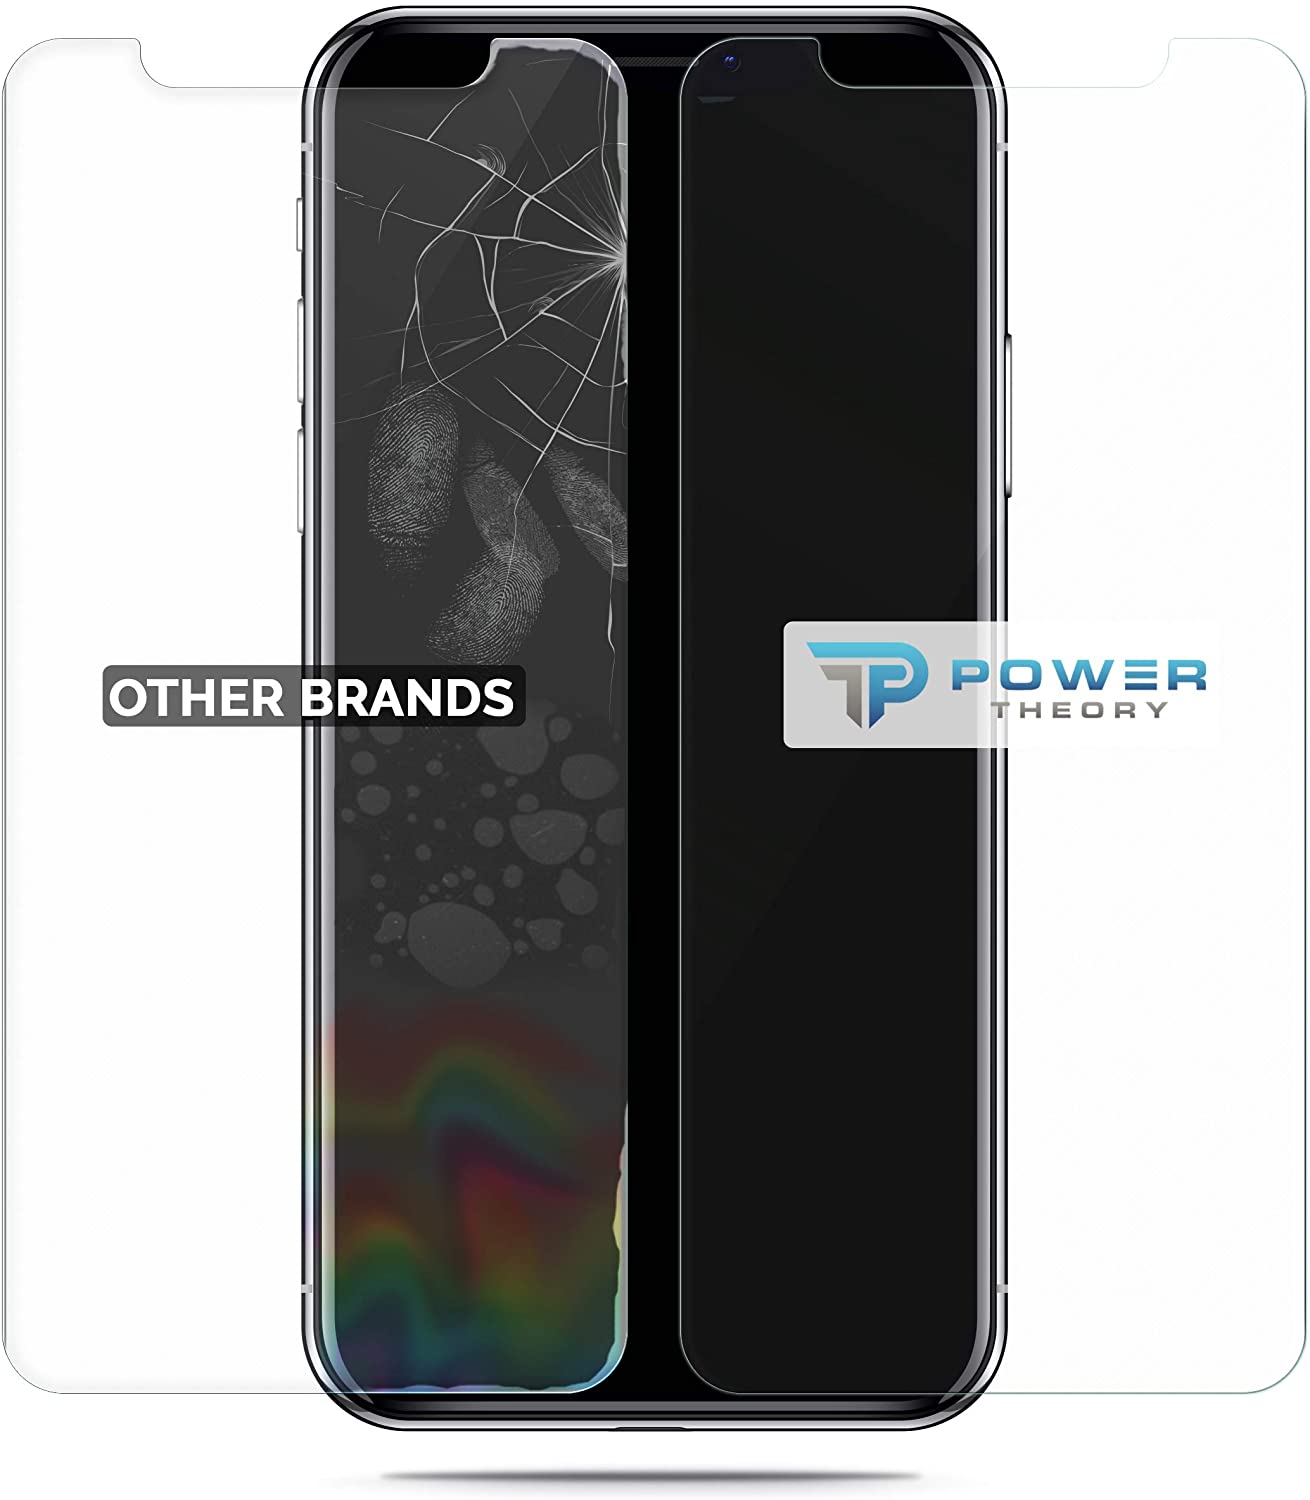 iPhone XS Max Tempered Glass Screen Protector [2-Pack]